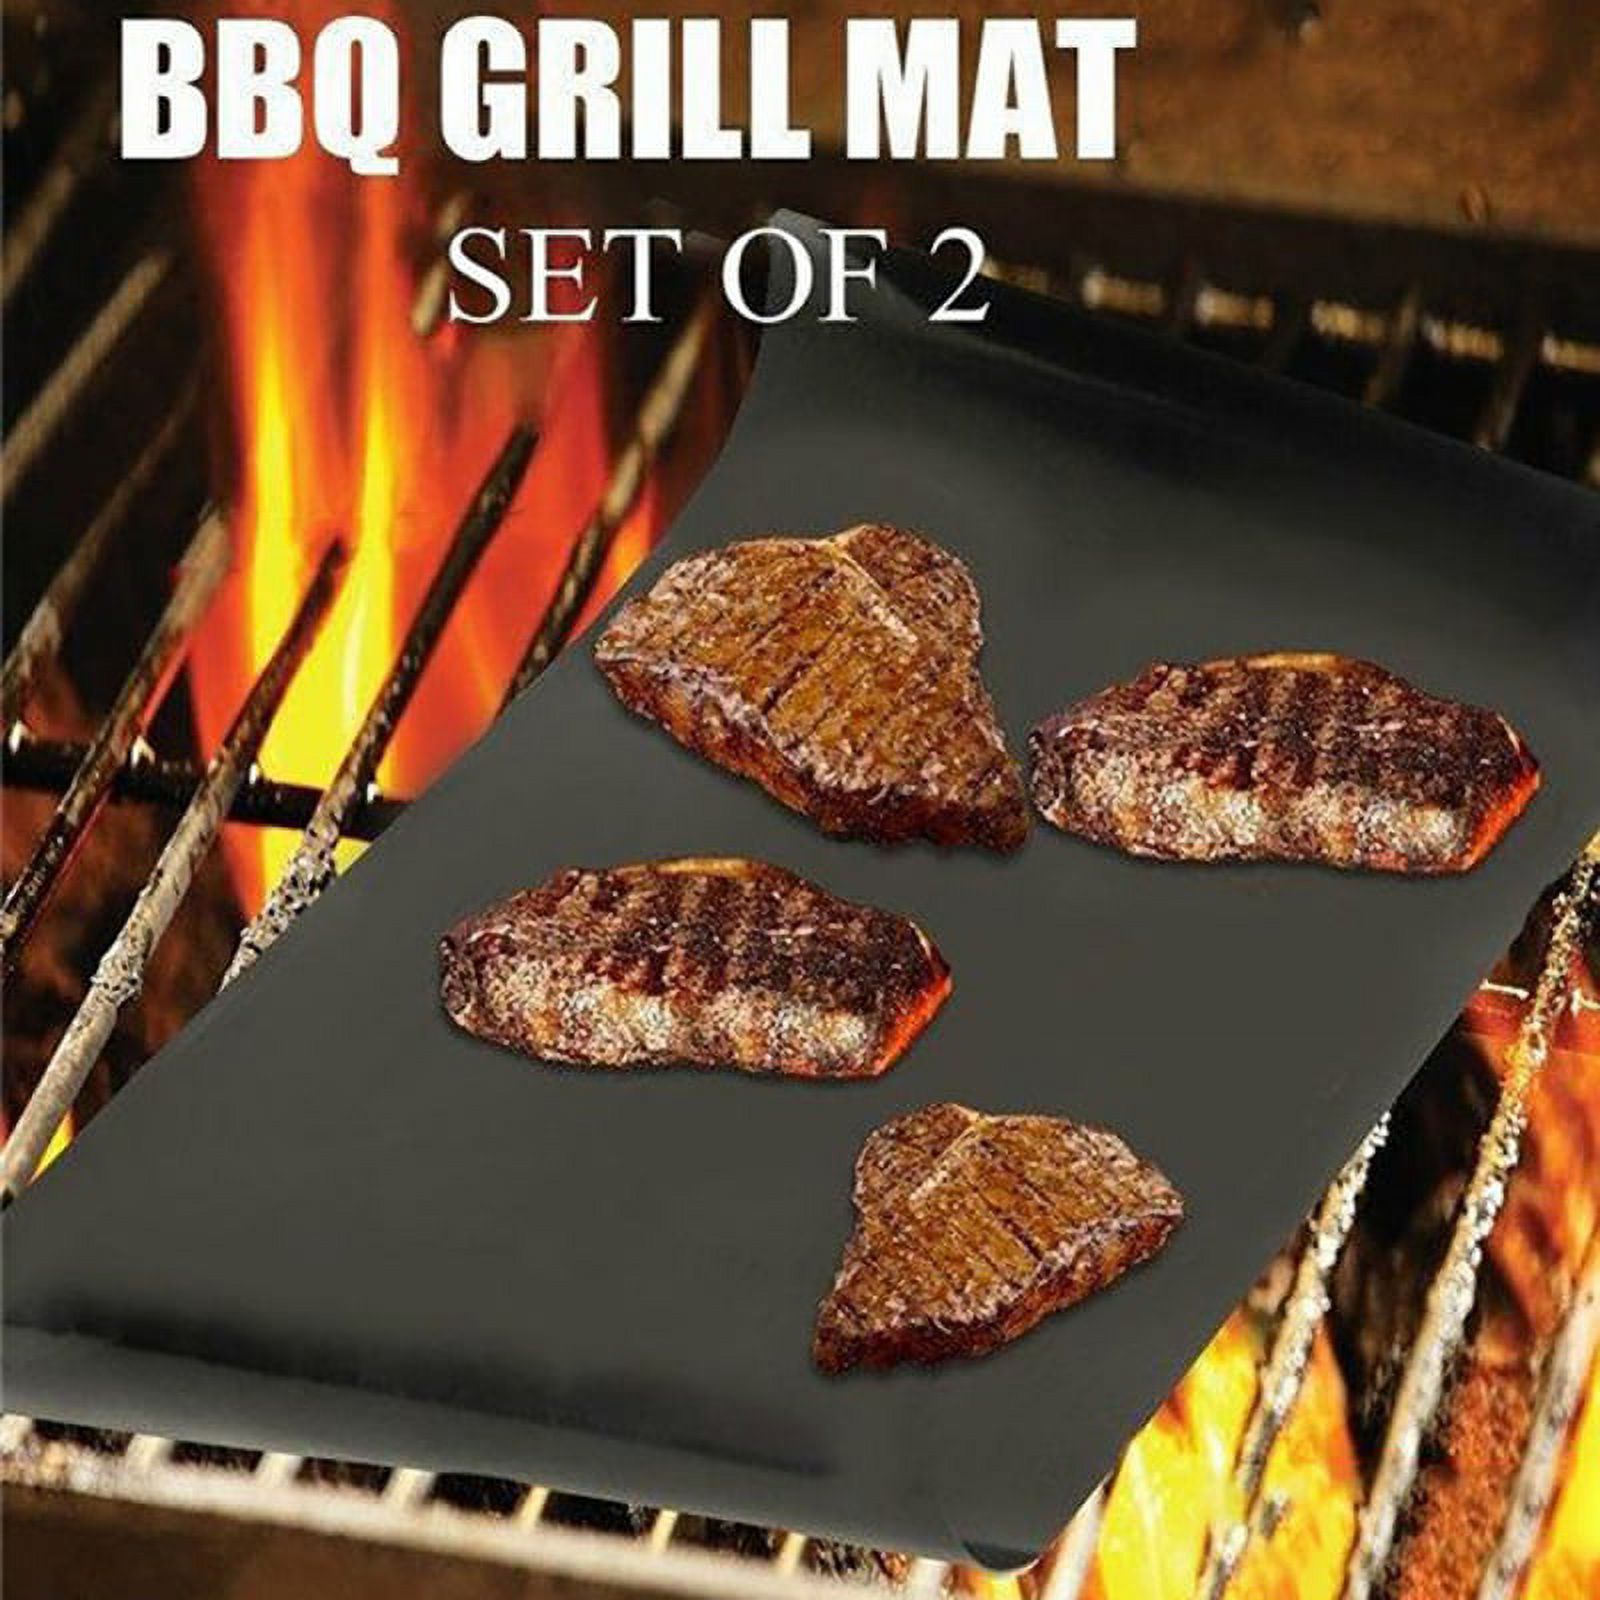 4Pcs/Pack Grill Mat BBQ Tool, Non-stick Reusable, For Food Heating, Grills and Ovens, 13*16" - image 5 of 8